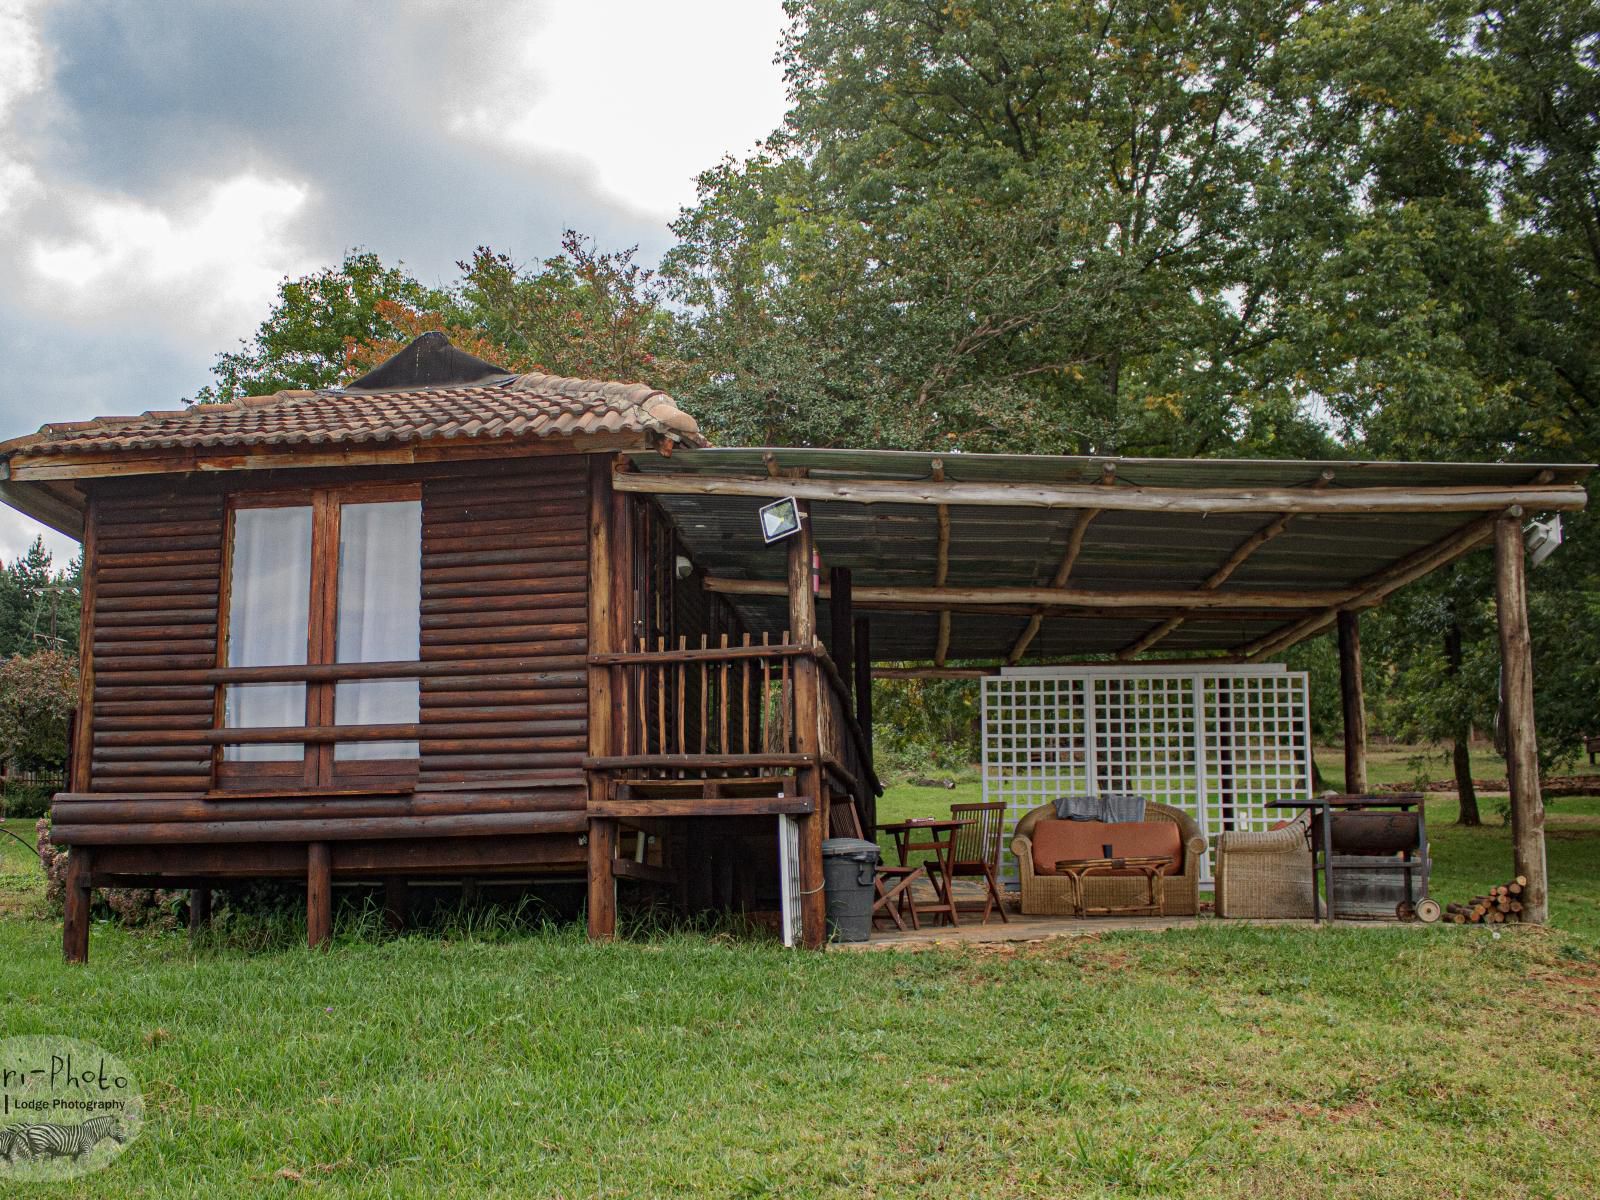 Gunyatoo Trout Farm And Guest Lodge Sabie Mpumalanga South Africa Cabin, Building, Architecture